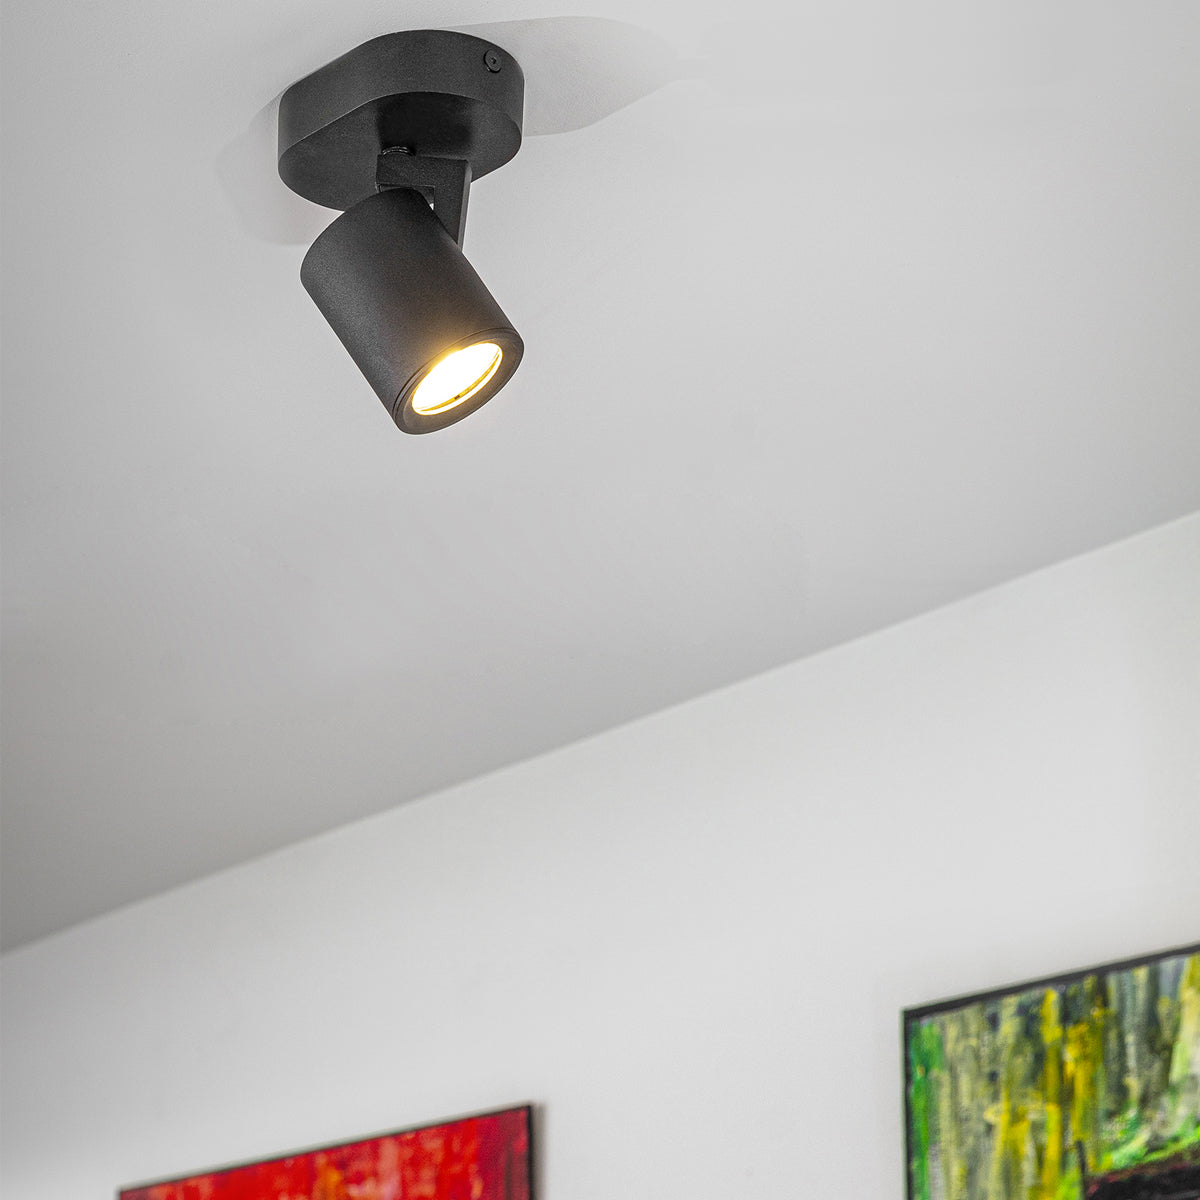 We combine practicality with atmosphere, the result is the Carla series. These universal spots can be used wherever you would like. The sleek design will feel like a fits perfectly with all interiors.  Adjustable to give the desired light out put exactly where you want the light to beam. These lights  are made from a high quality aluminum and powder coated to black immaculate finish.